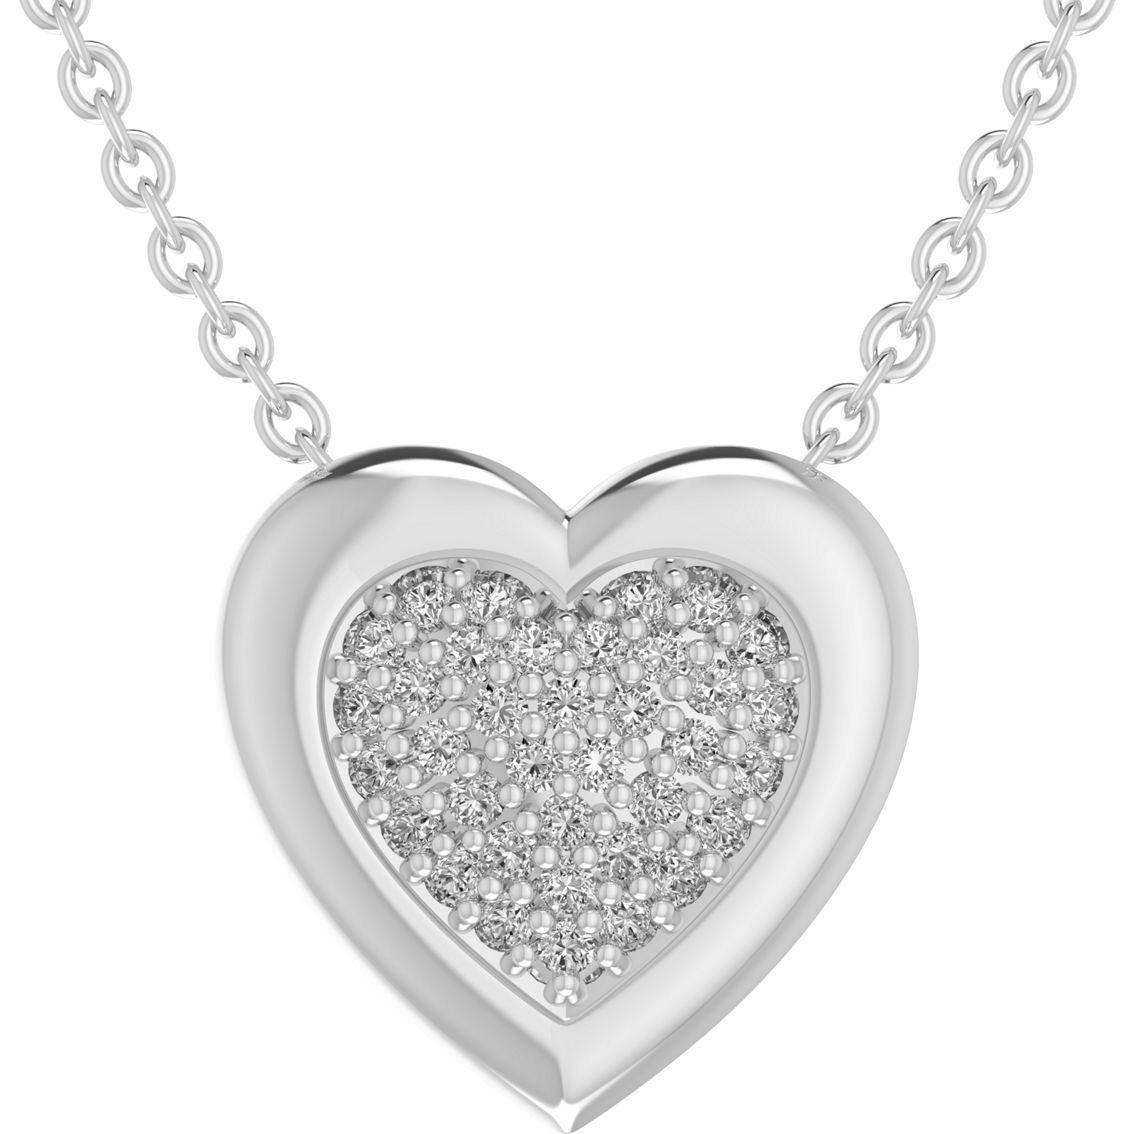 Sterling silver 1/5 CTW Diamond Heart Earrings and Pendant Set - Image 2 of 6